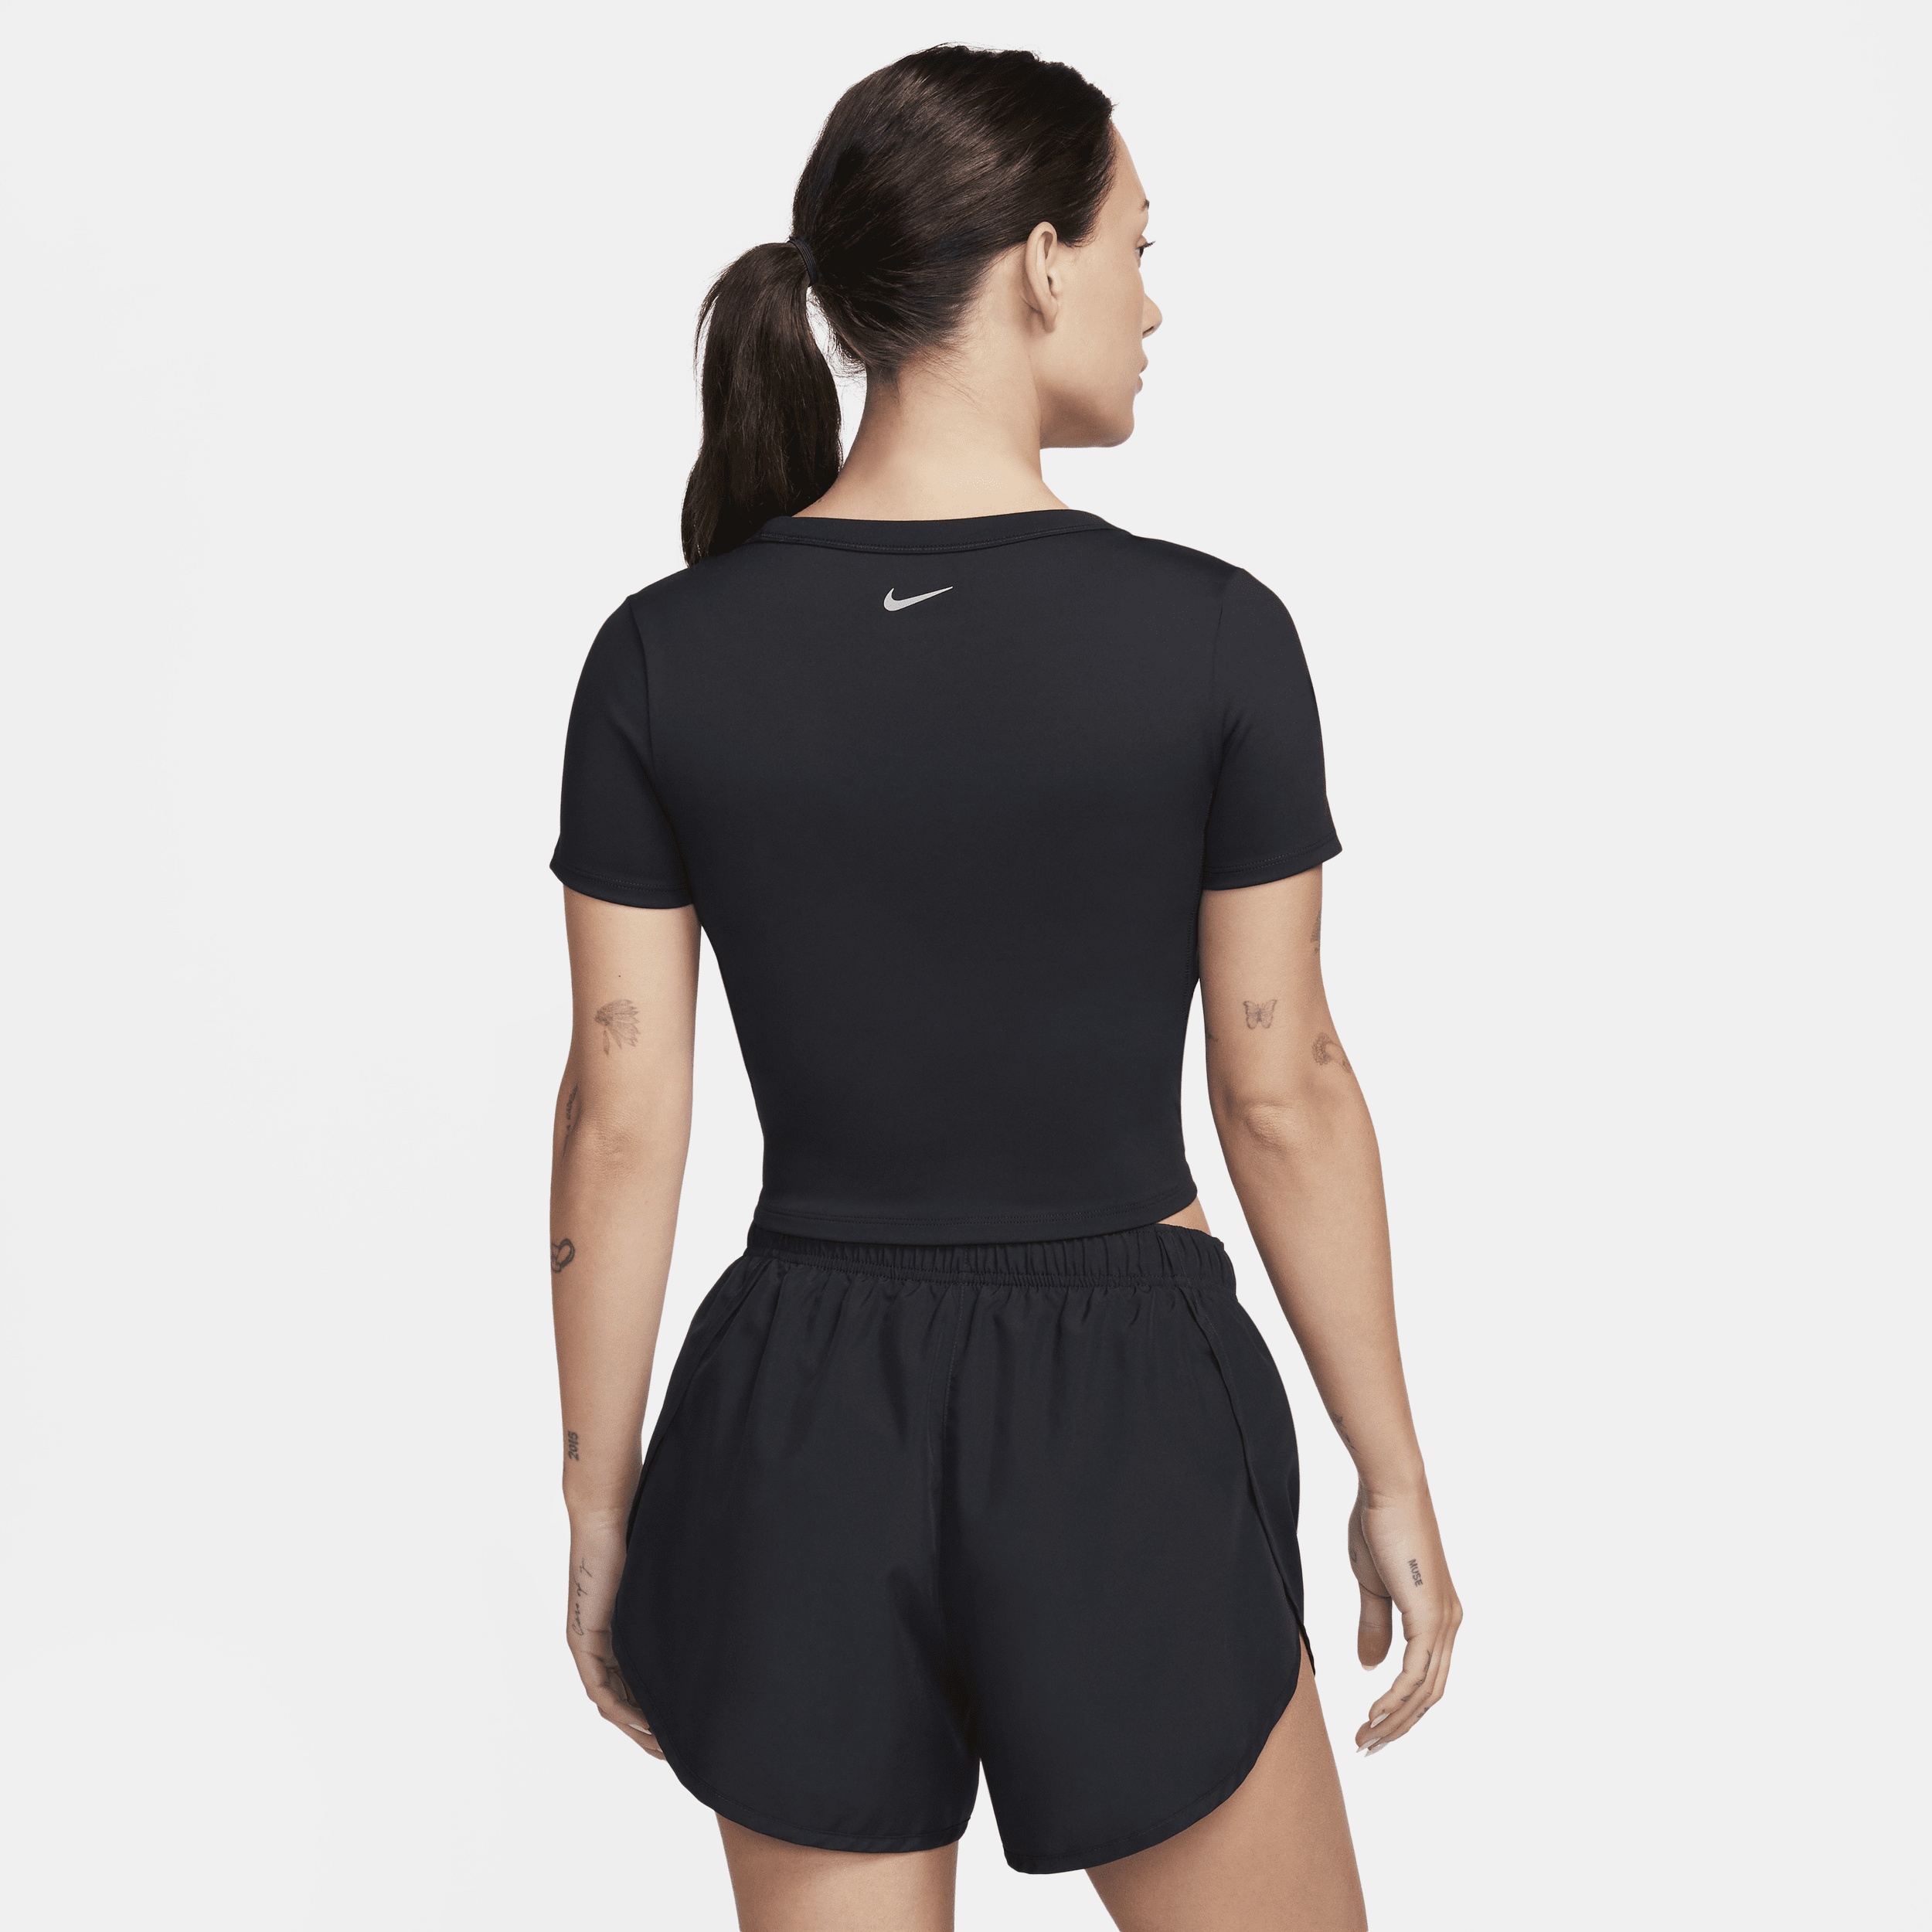 Nike Women's One Fitted Dri-FIT Short-Sleeve Cropped Top - 2